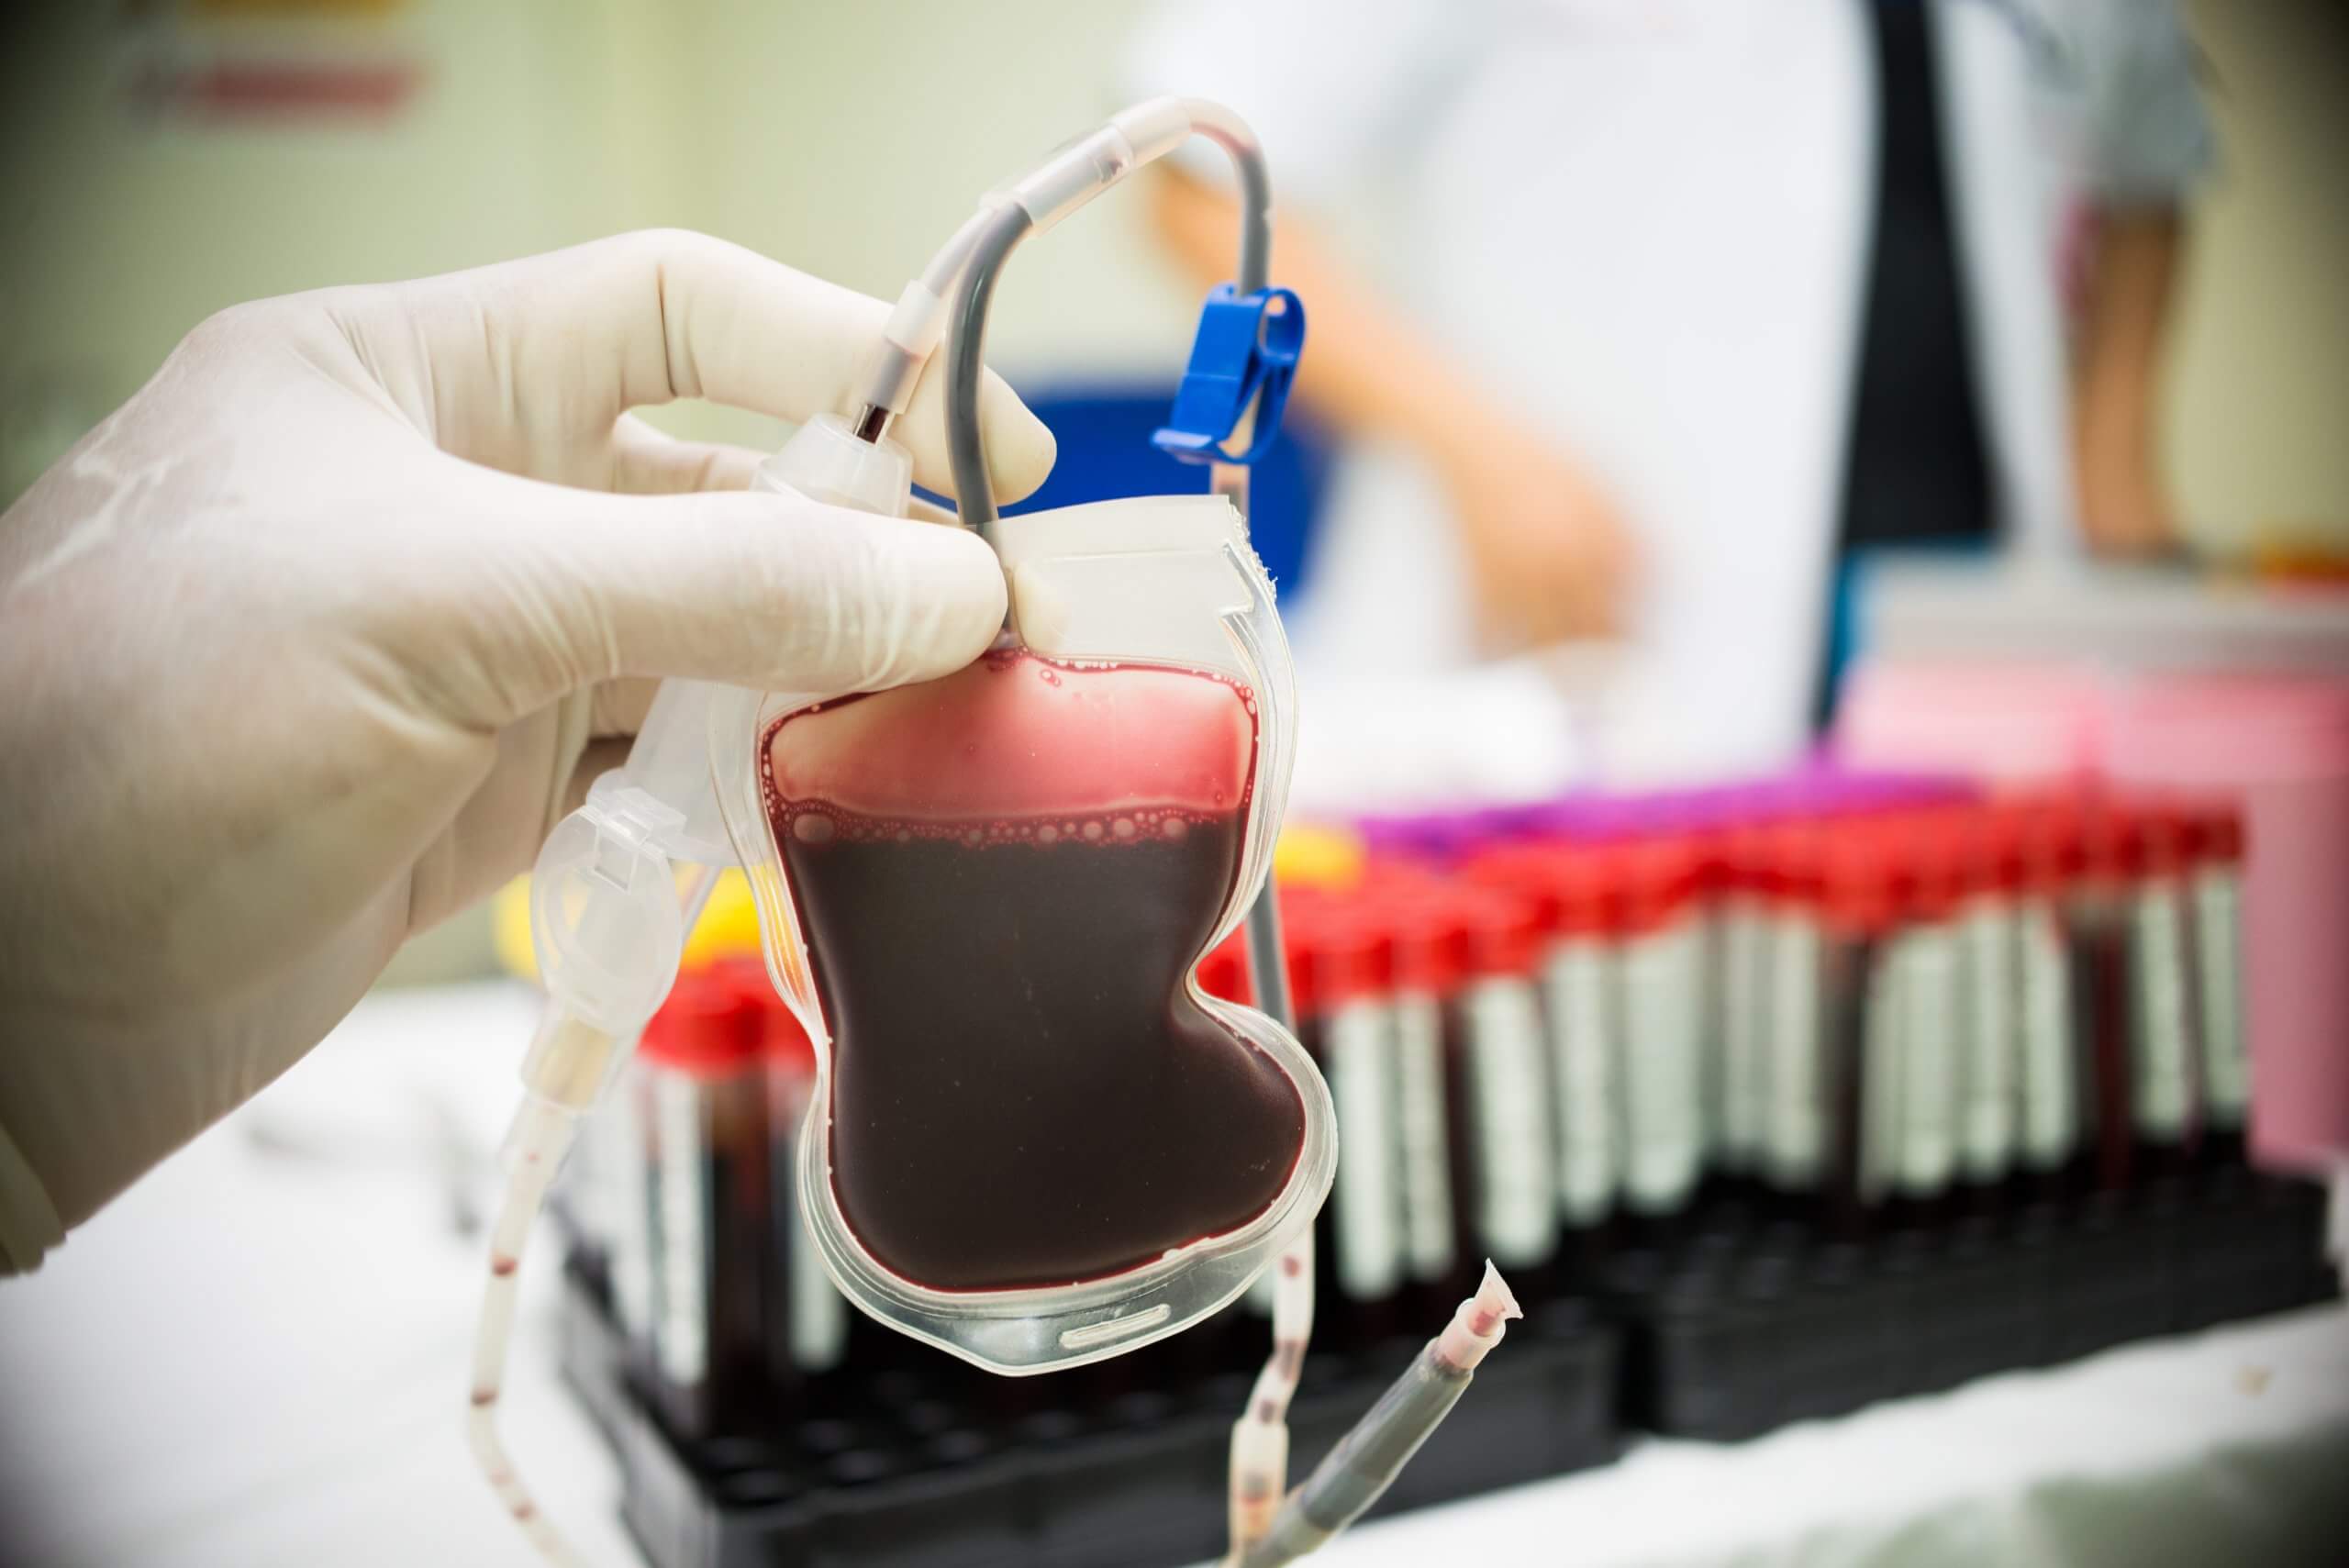 New study suggests umbilical cord blood stem cells implanted into COVID-19  patients could improve chances of survival | Cells4Life